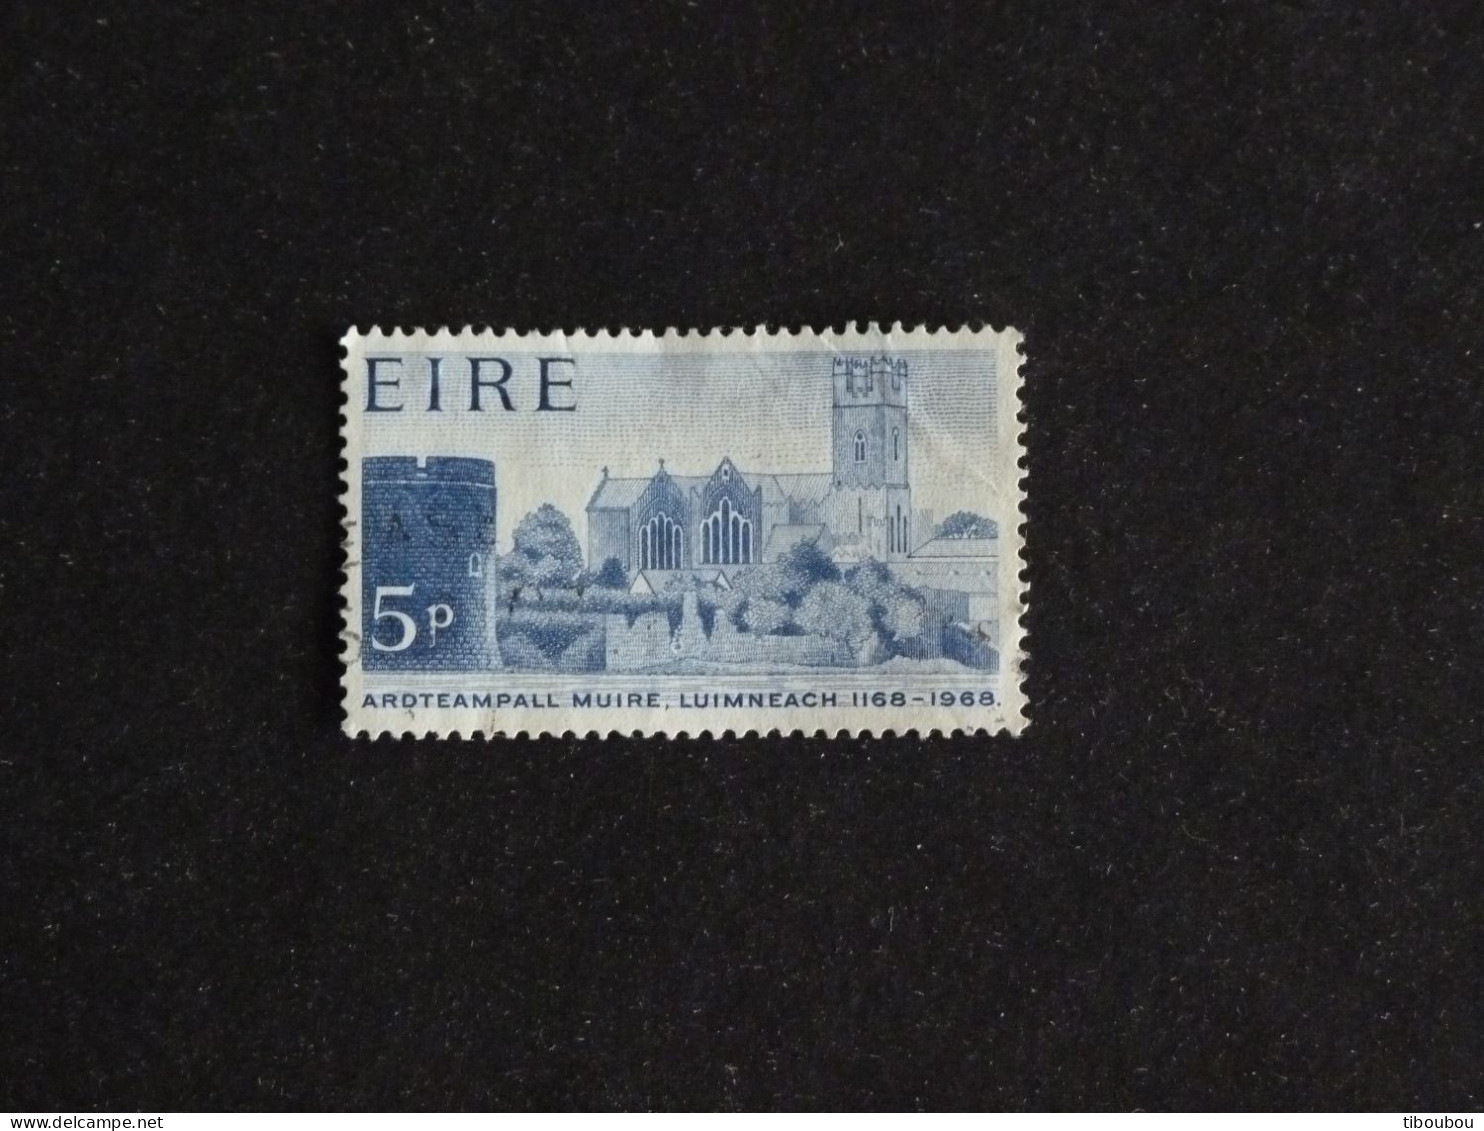 IRLANDE IRELAND EIRE YT 205 OBLITERE - CATHEDRALE SAINTE MARIE A LUIMNEACH - Used Stamps